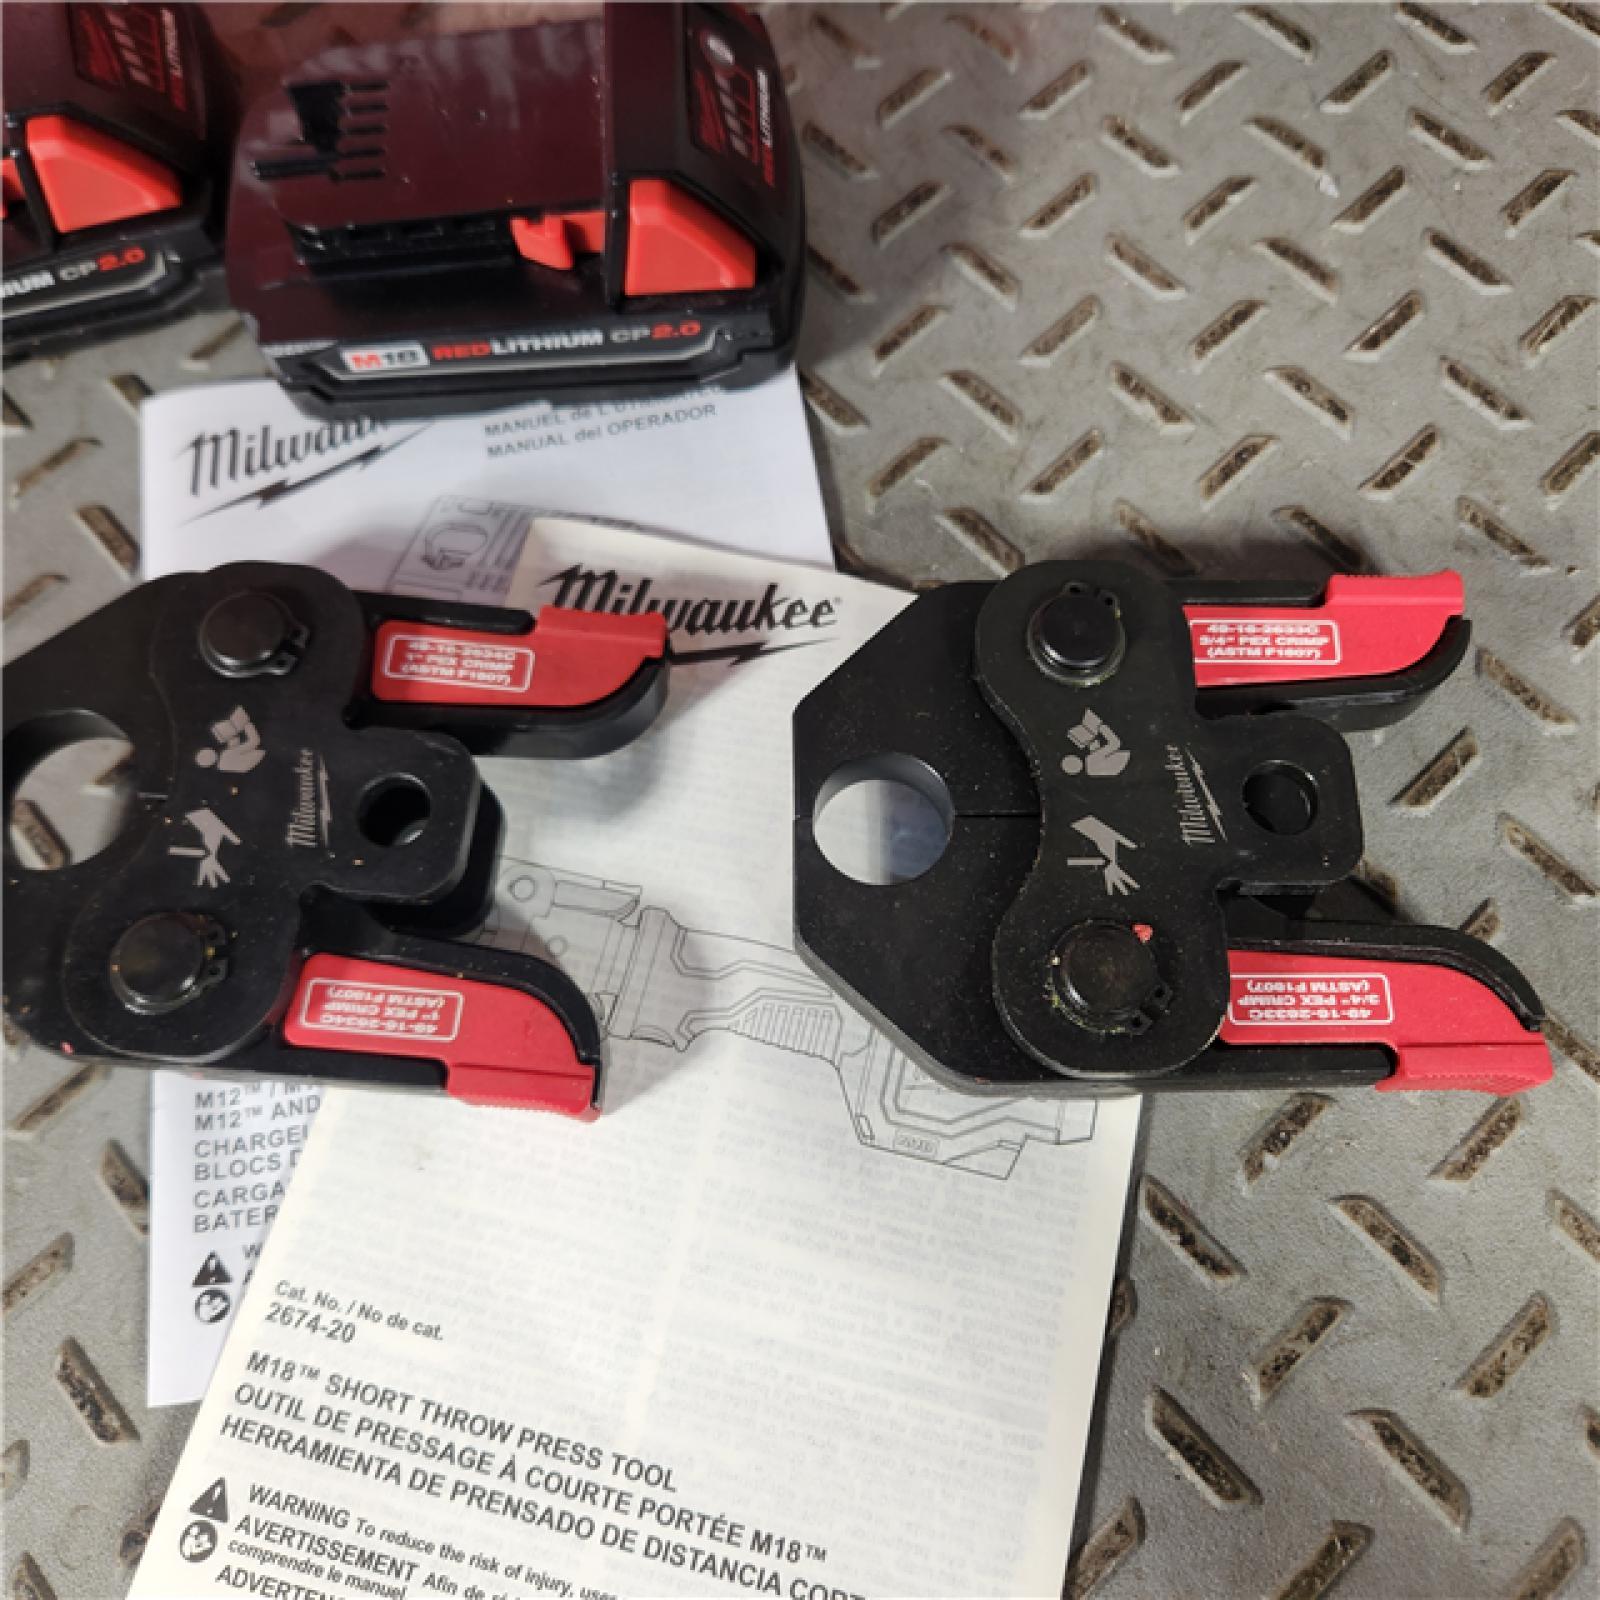 Houston Location - AS-IS Milwaukee-2674-22C M18 Short Throw Press Tool Kit W/ PEX Crimp Jaws (ONLY INCLUDES 1' & 3/4) - Appears IN LIKE NEW Condition -